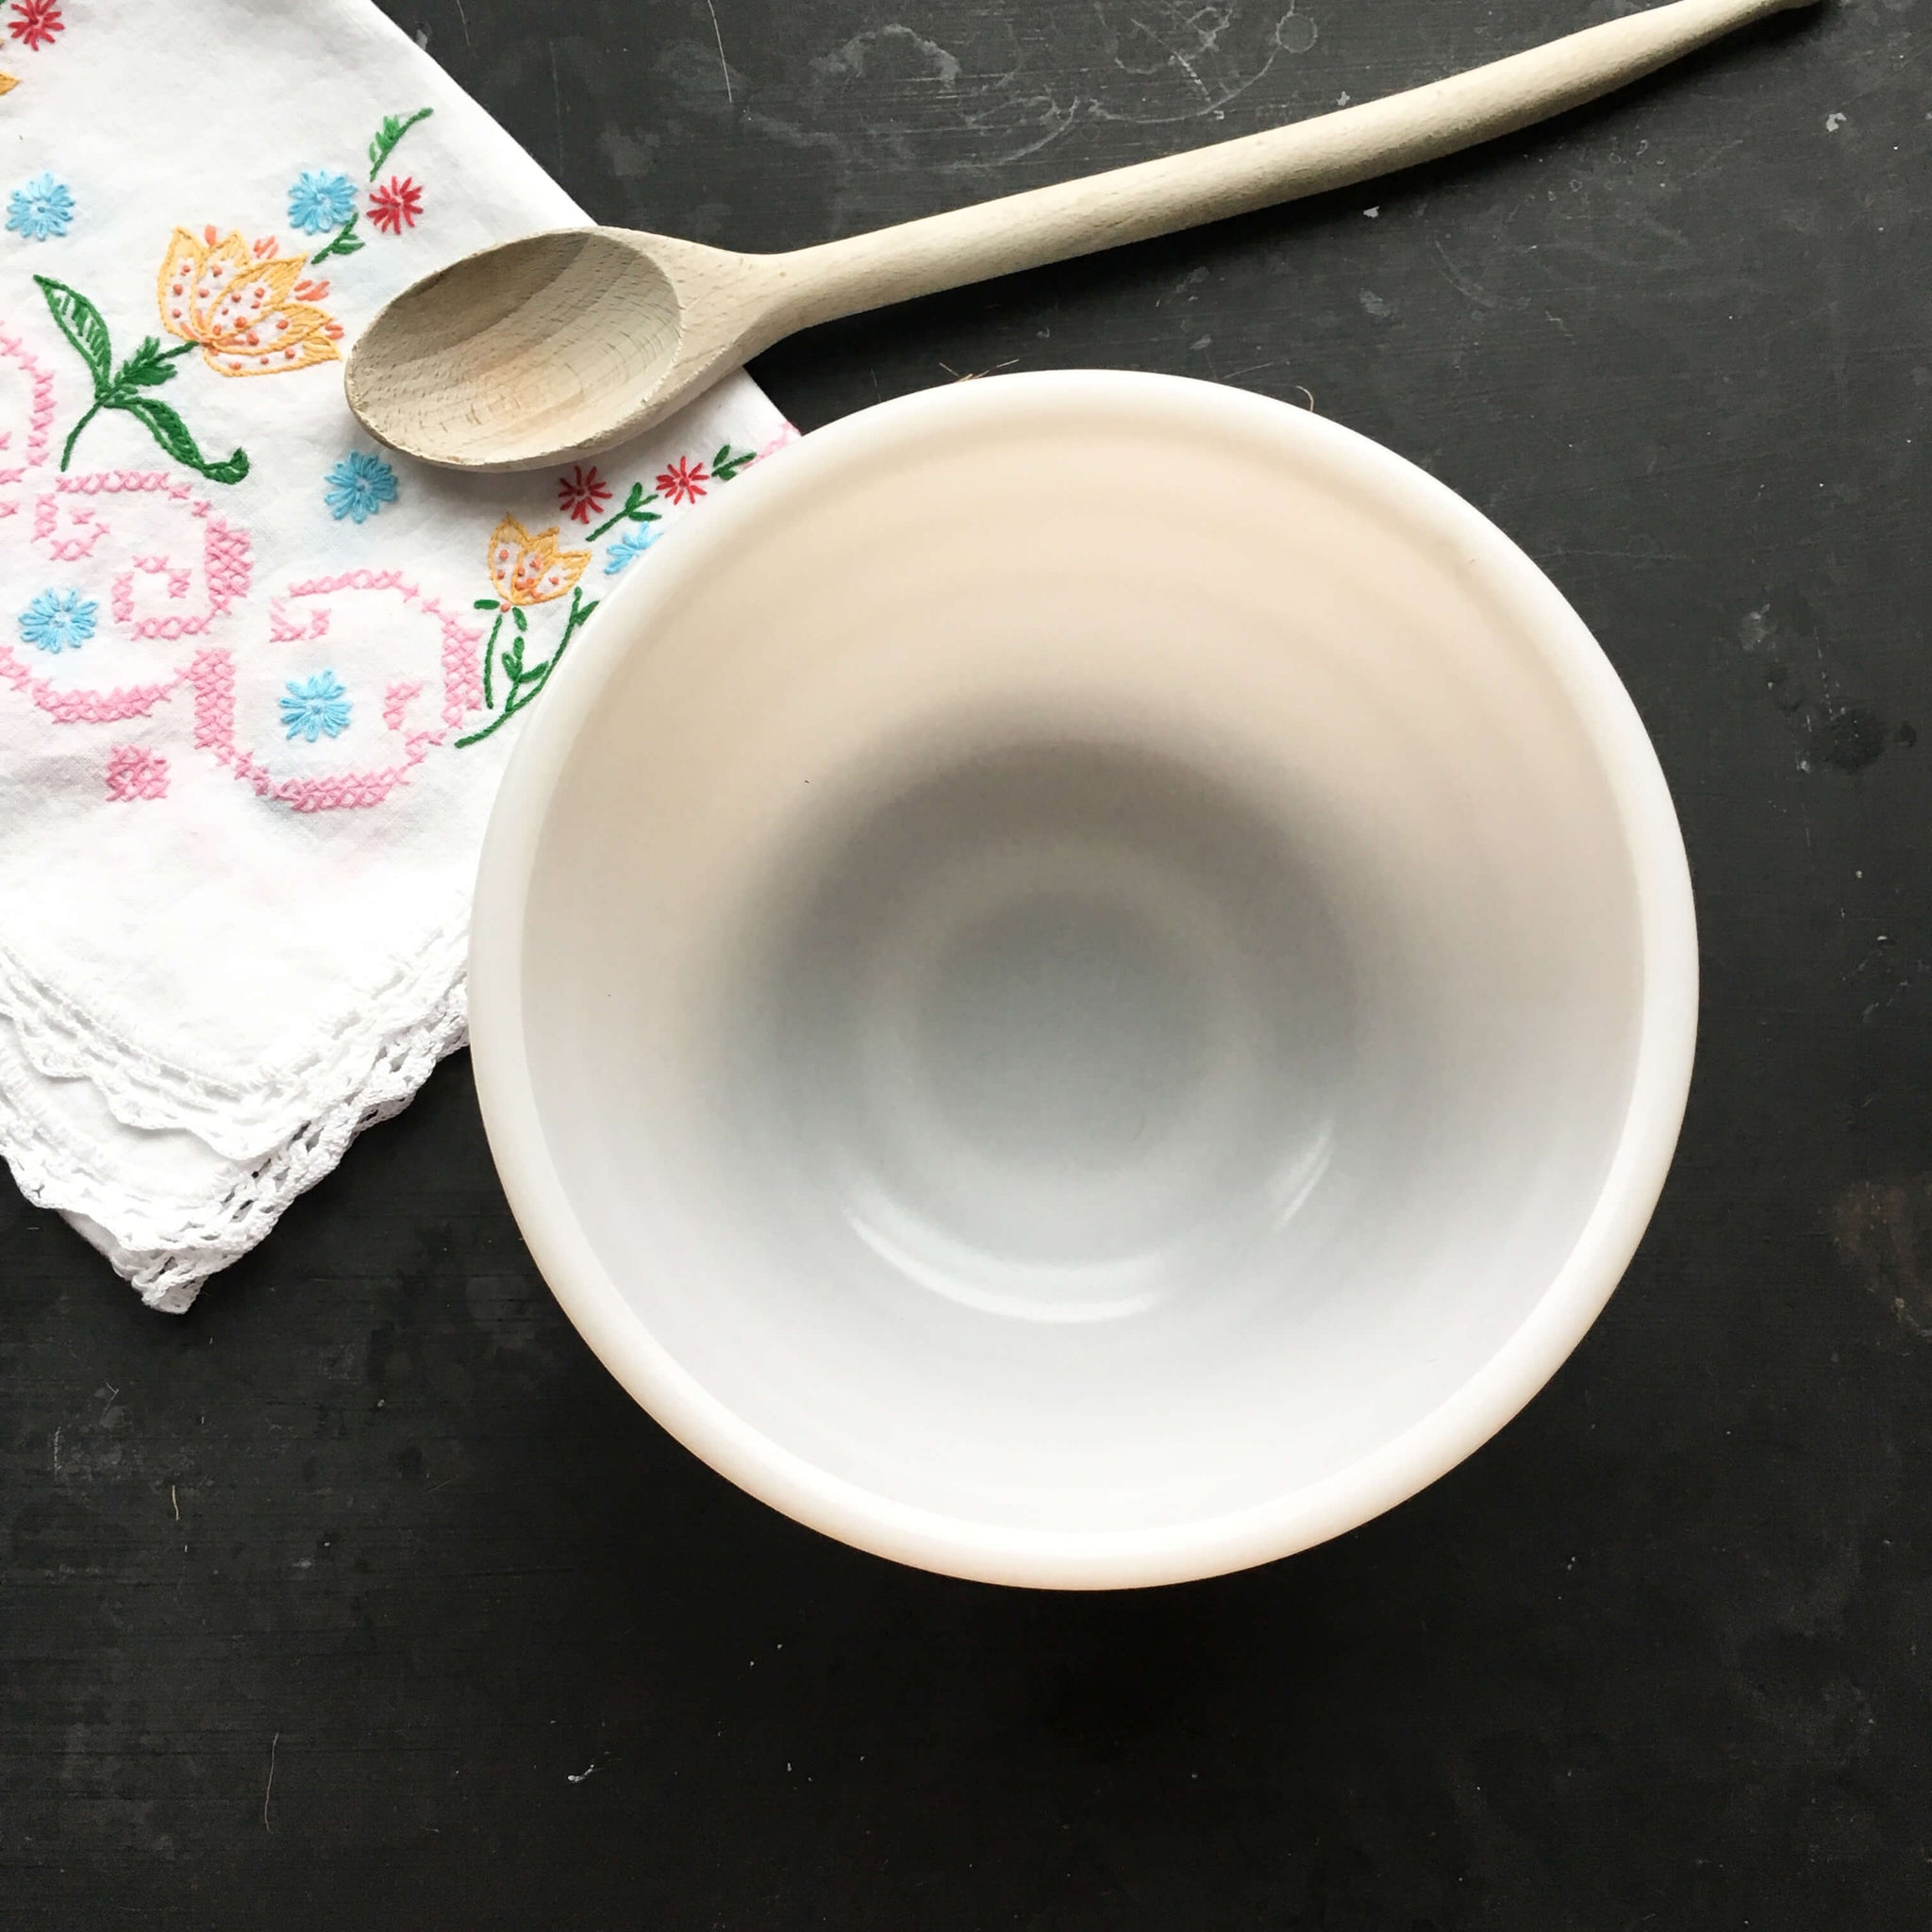 Vintage 1940s Milk Glass Mixing Bowl Made by General Electric - Beehive Style